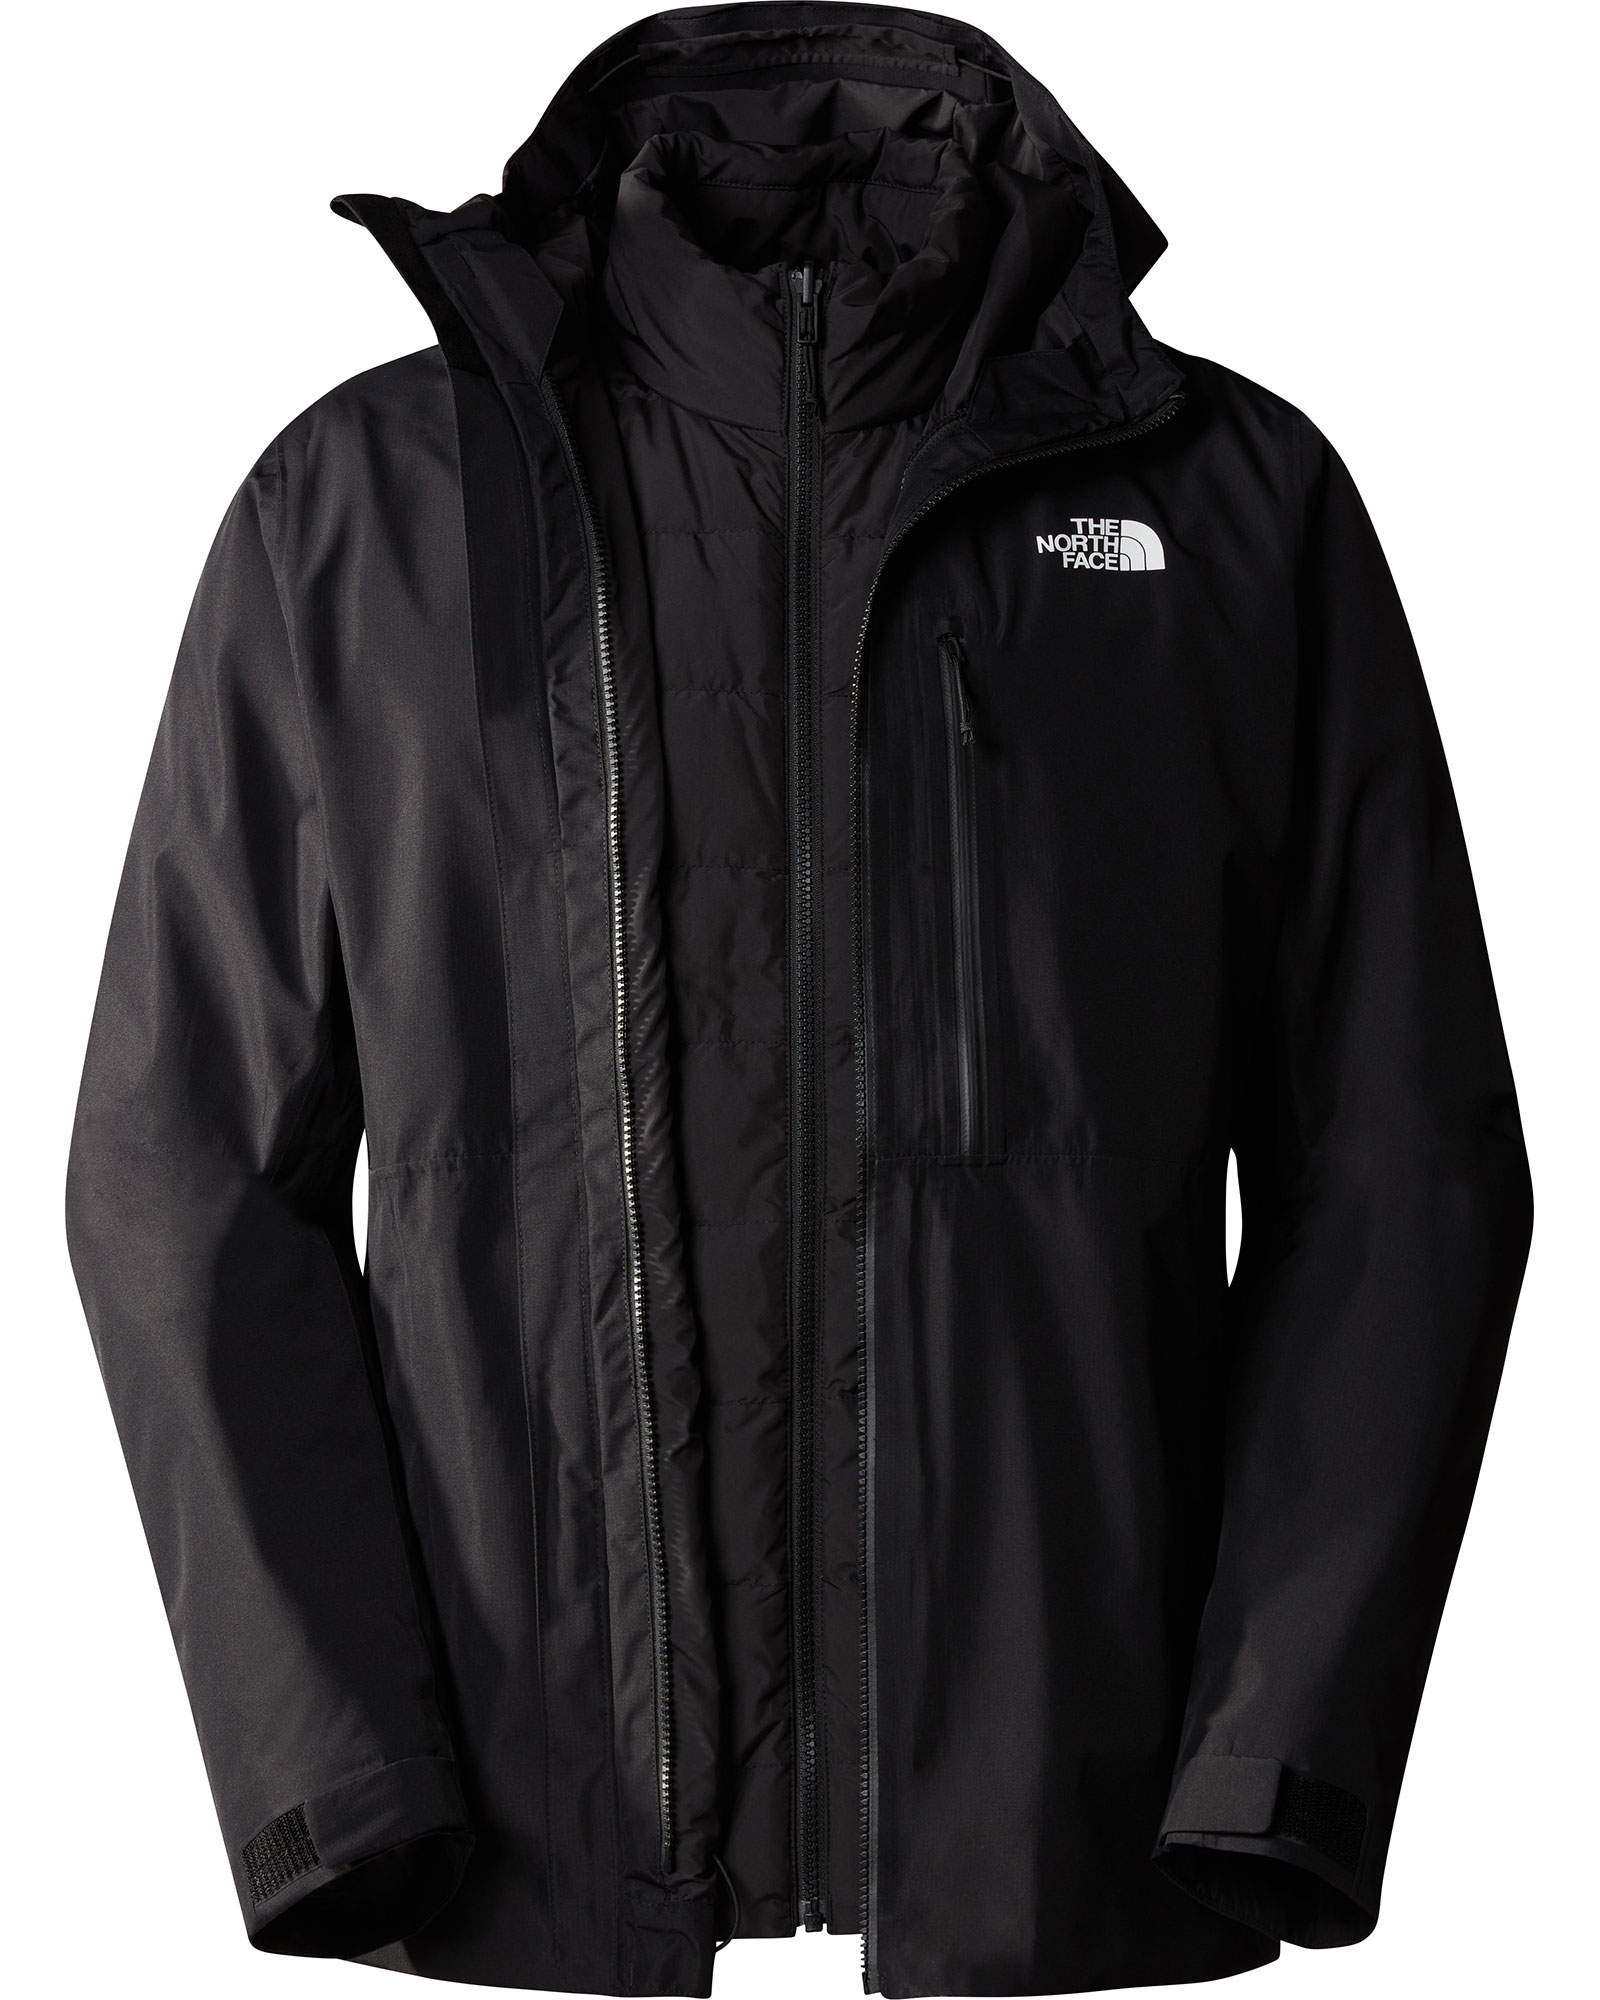 The North Face Men’s North Table Down Triclimate Jacket - TNF Black-TNF Black M